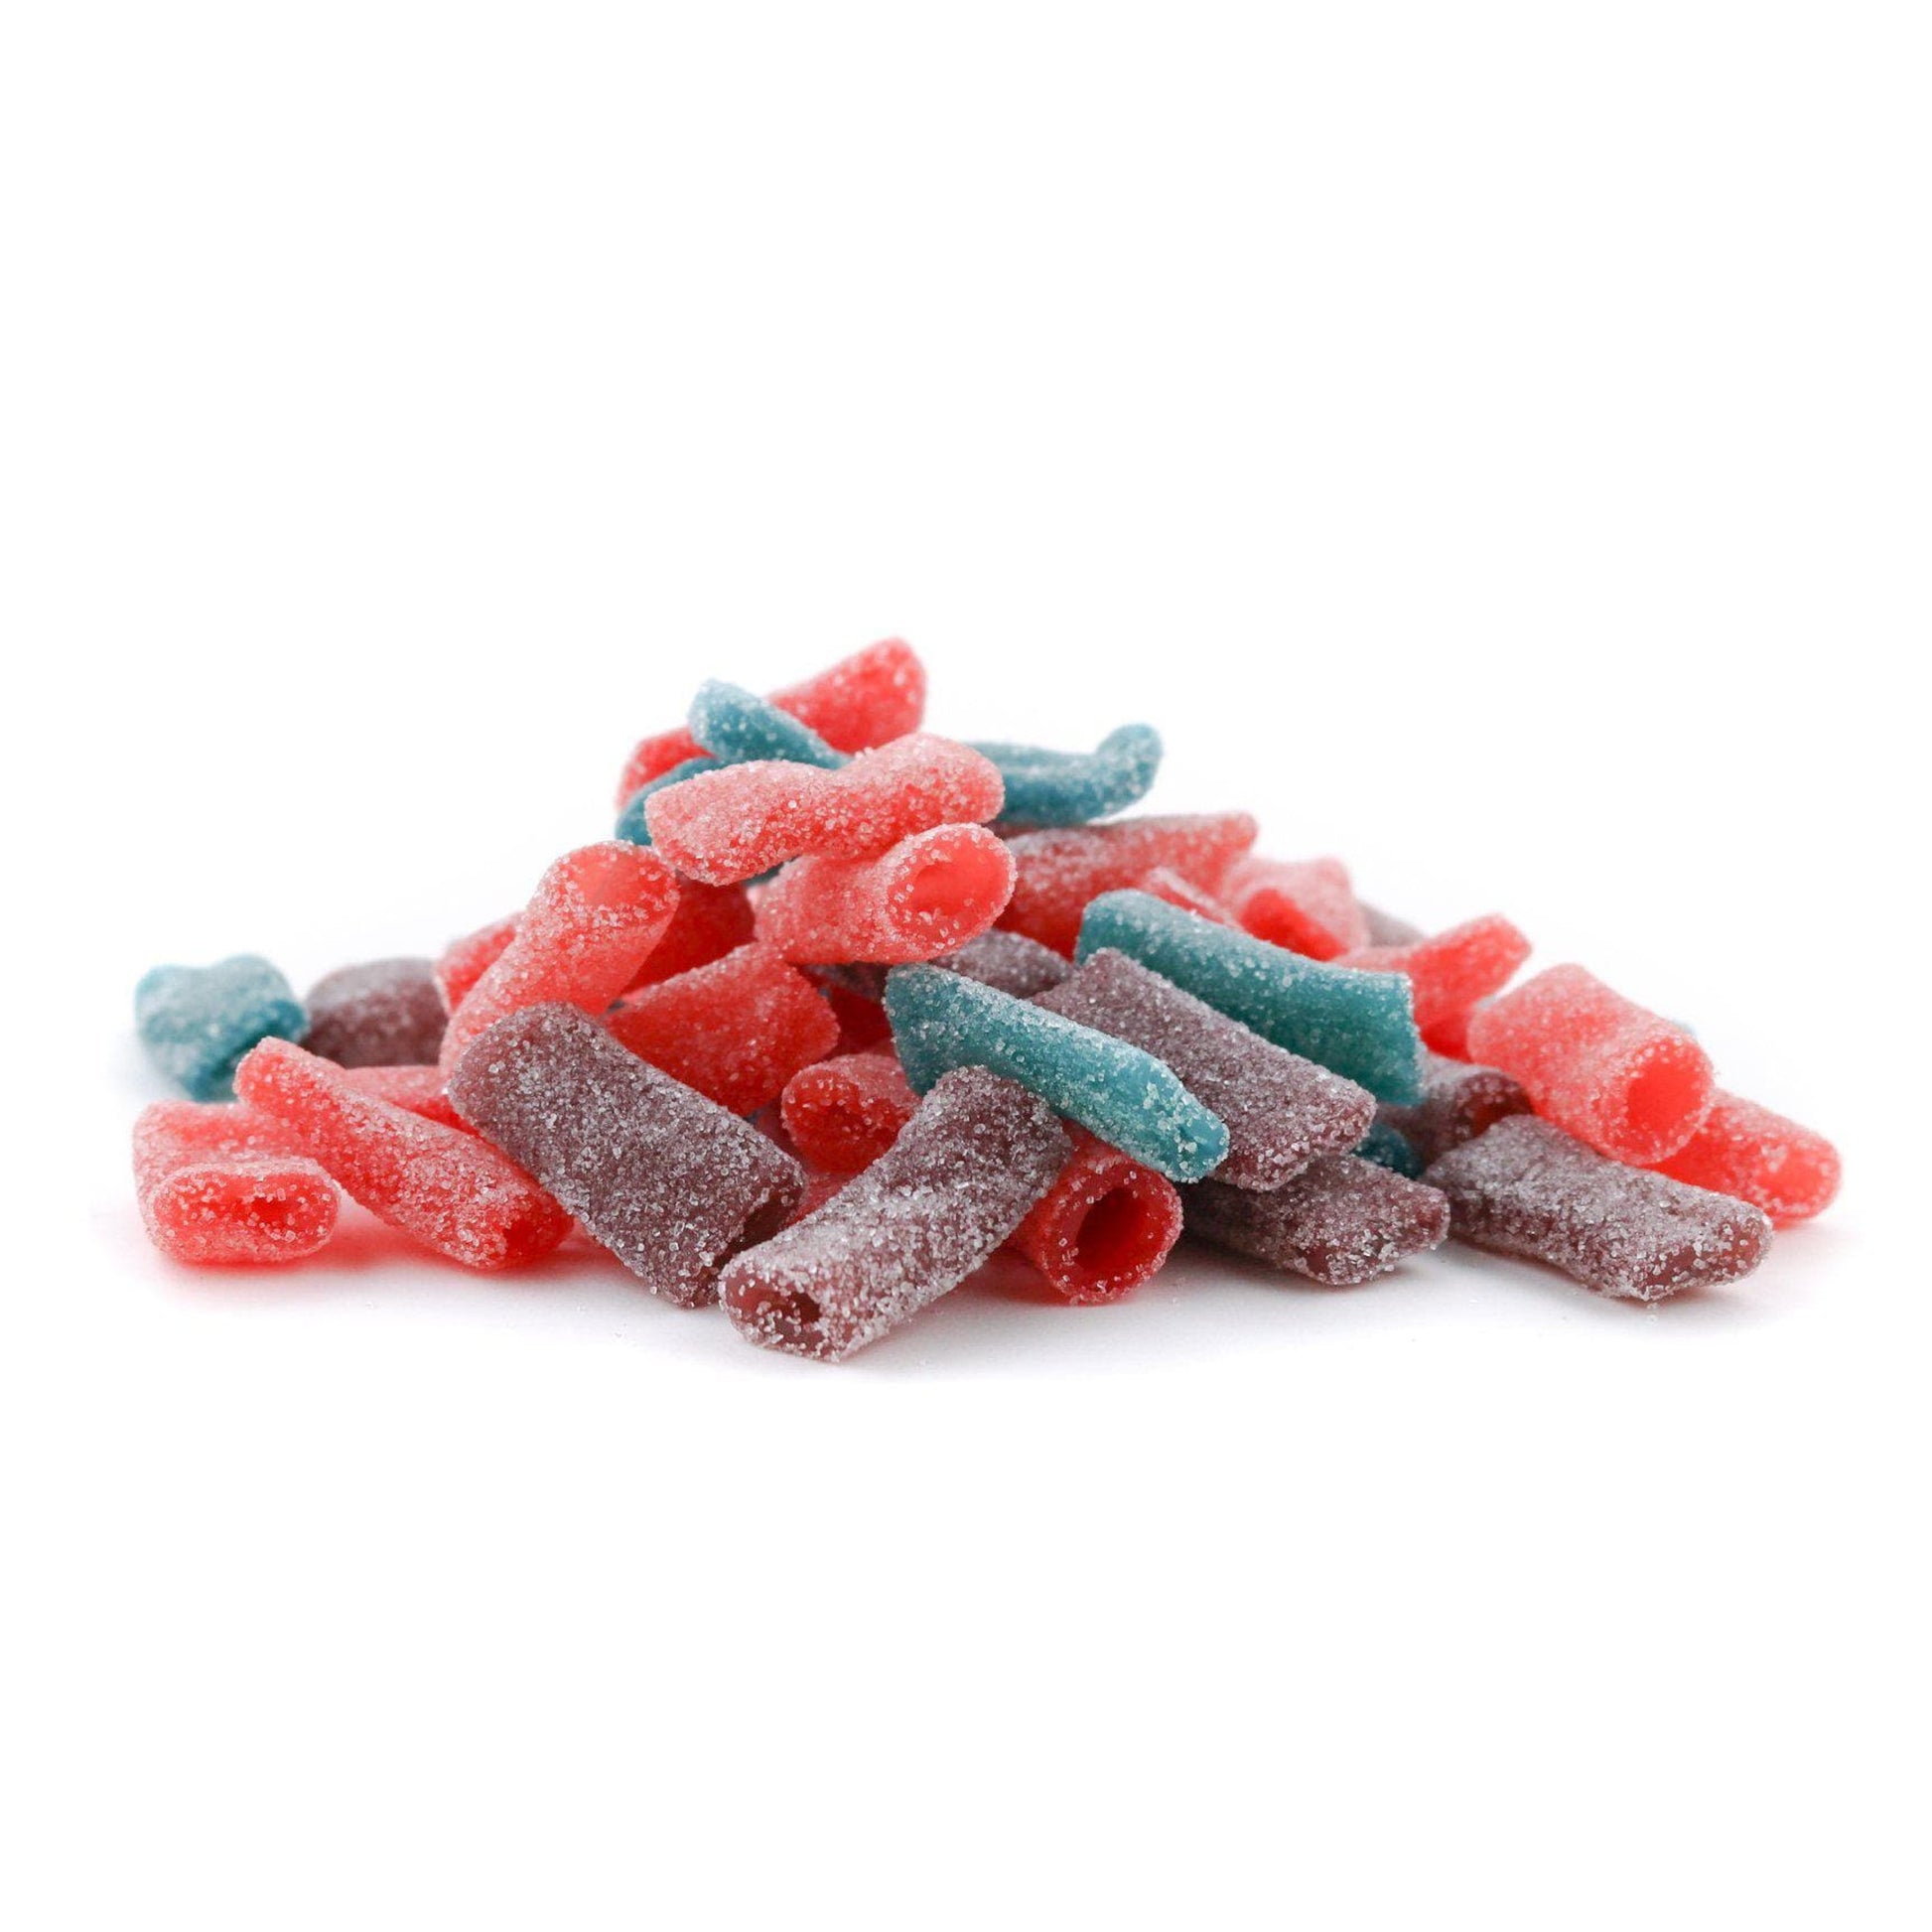 Sugar coated Cotton Candy, Dream Berry, Passion Punch, and Grateful Grape bite sized candy straws